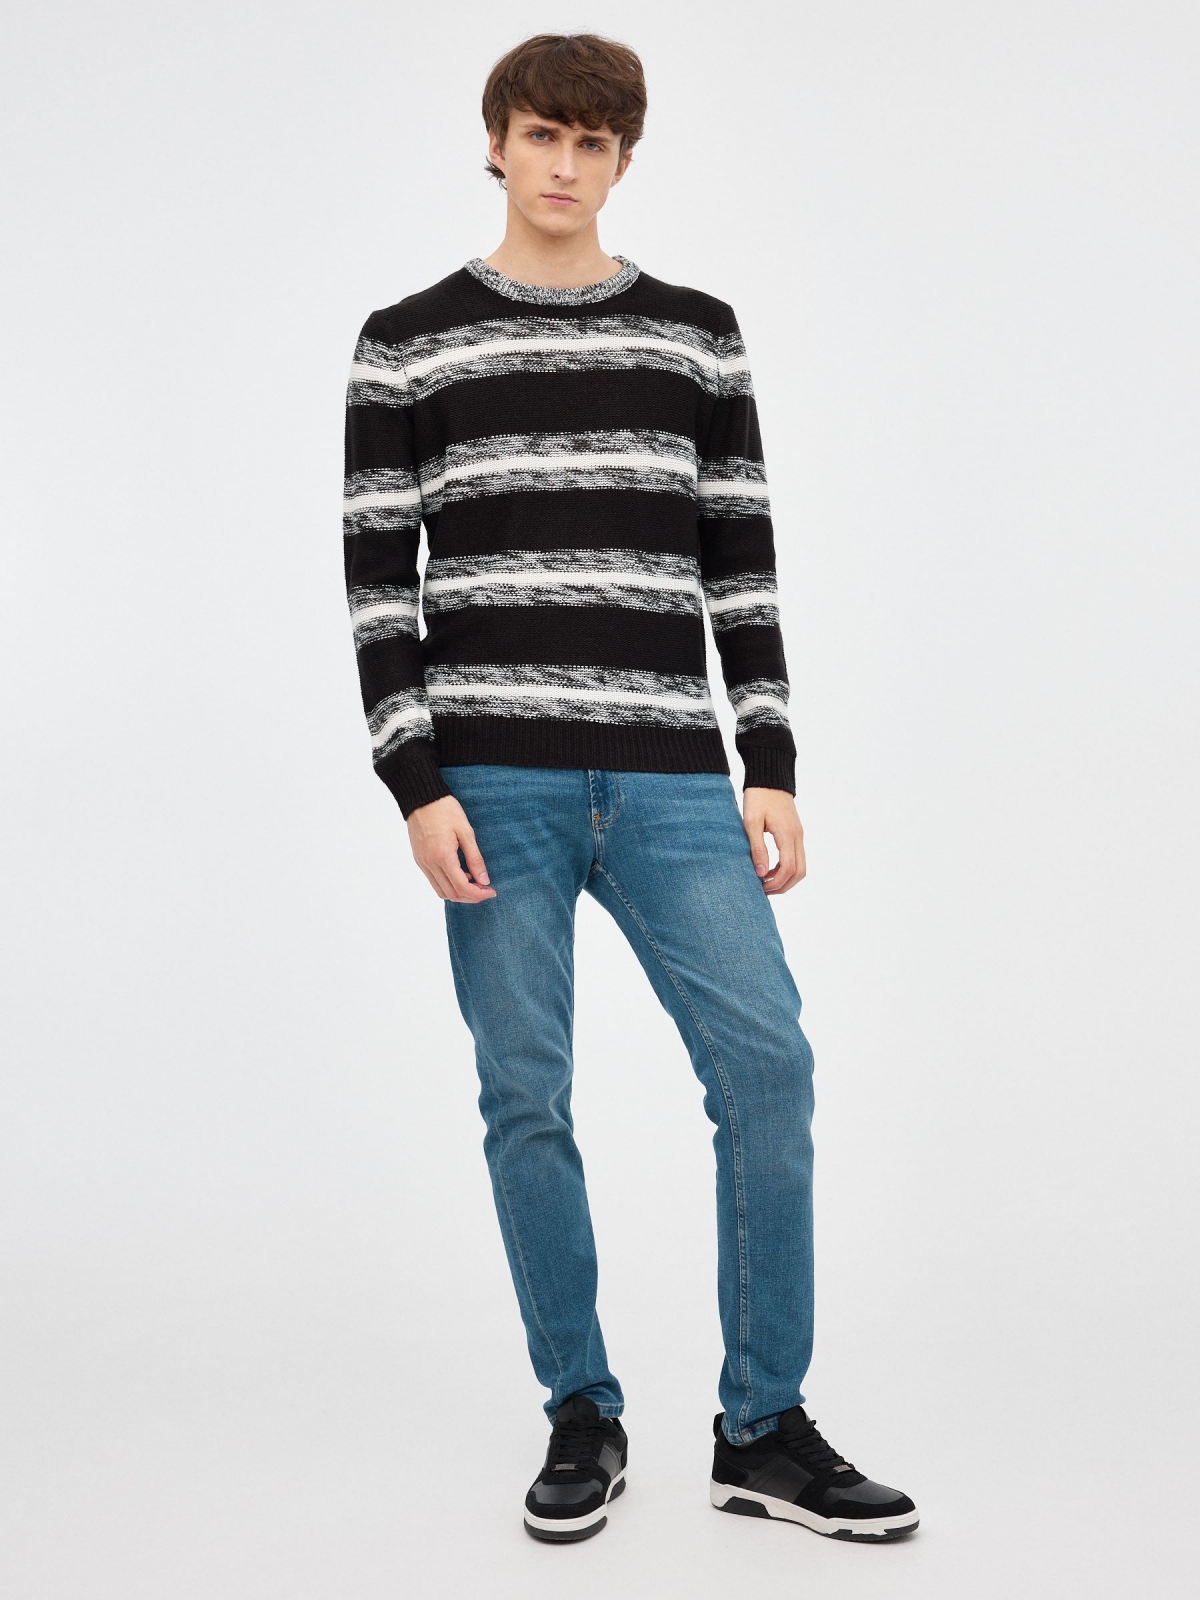 Marbled striped jumper black front view